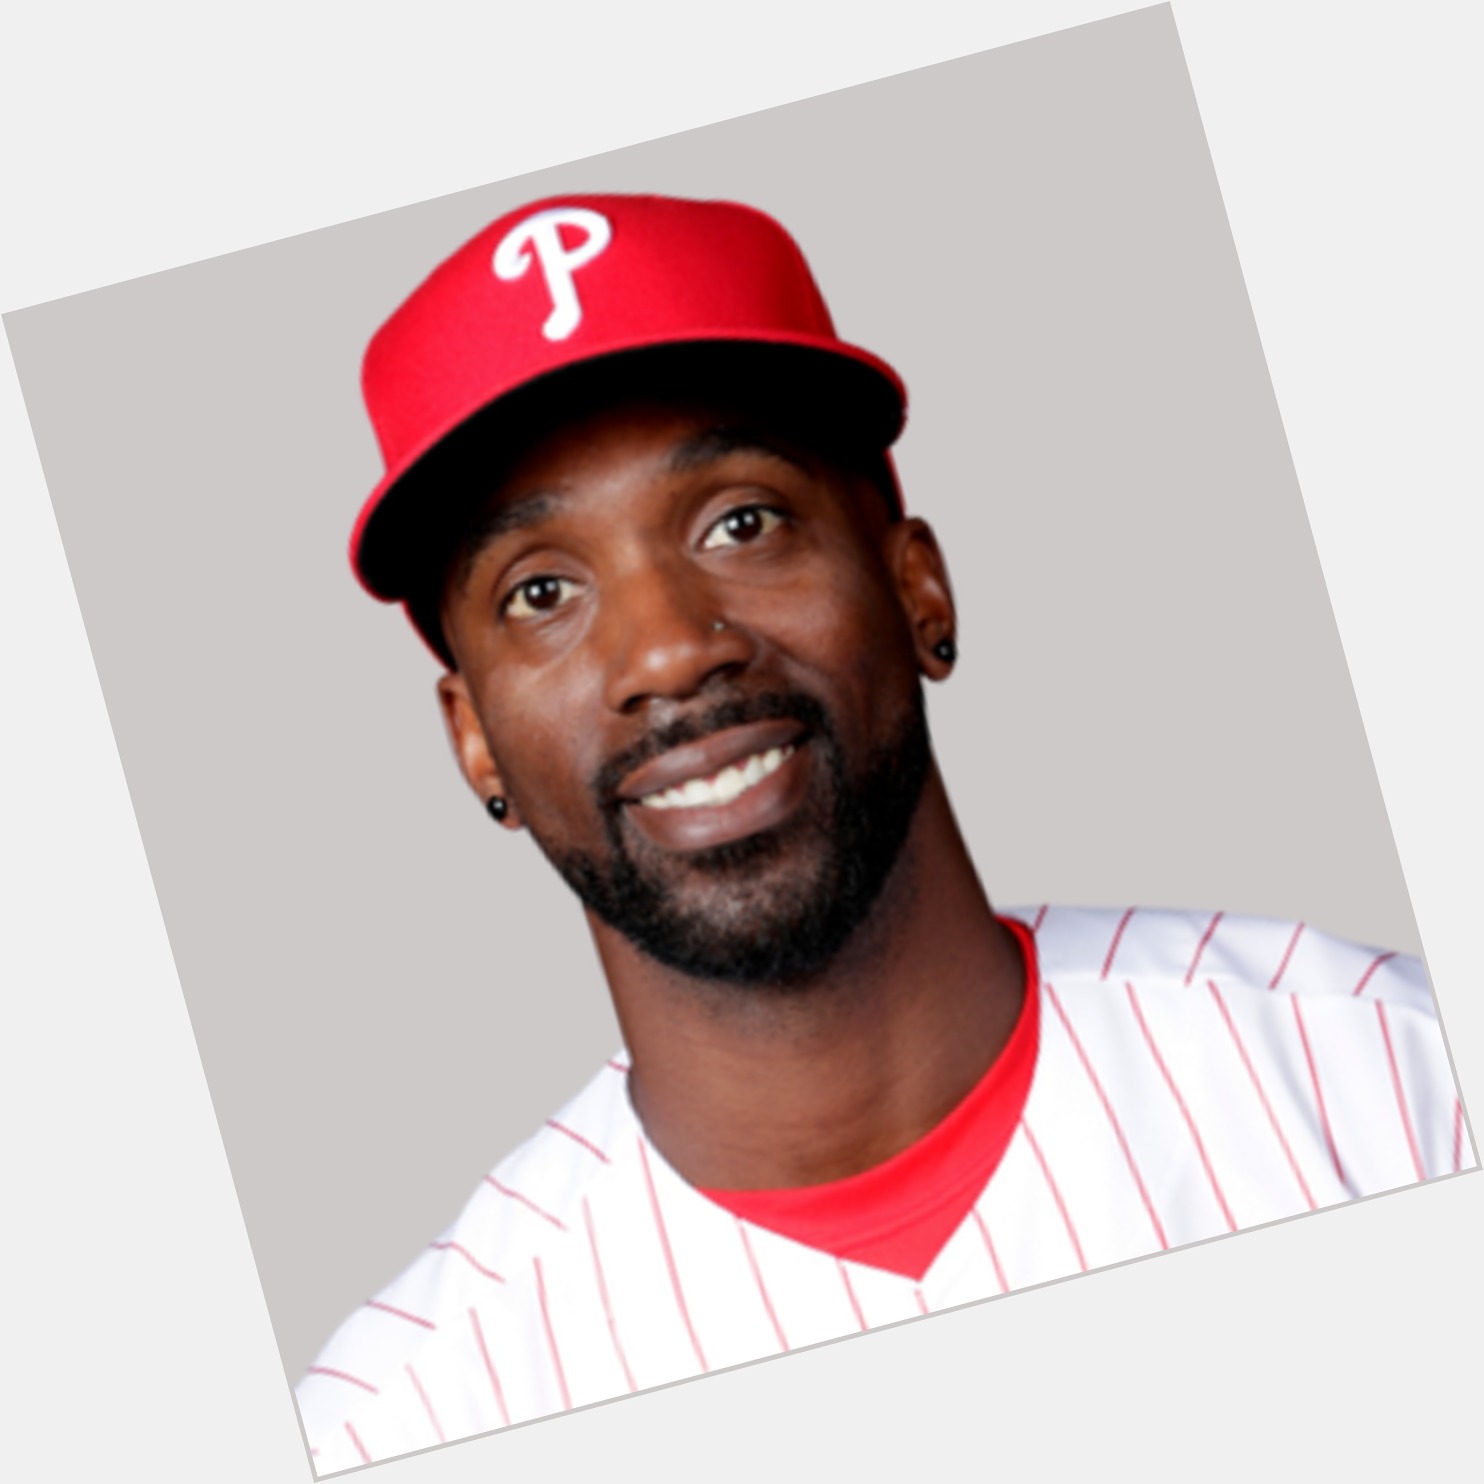 <a href="/hot-men/andrew-mccutchen/is-he-christian-jamaican-married-related-lawrence-mccutcheon">Andrew Mccutchen</a> Athletic body,  